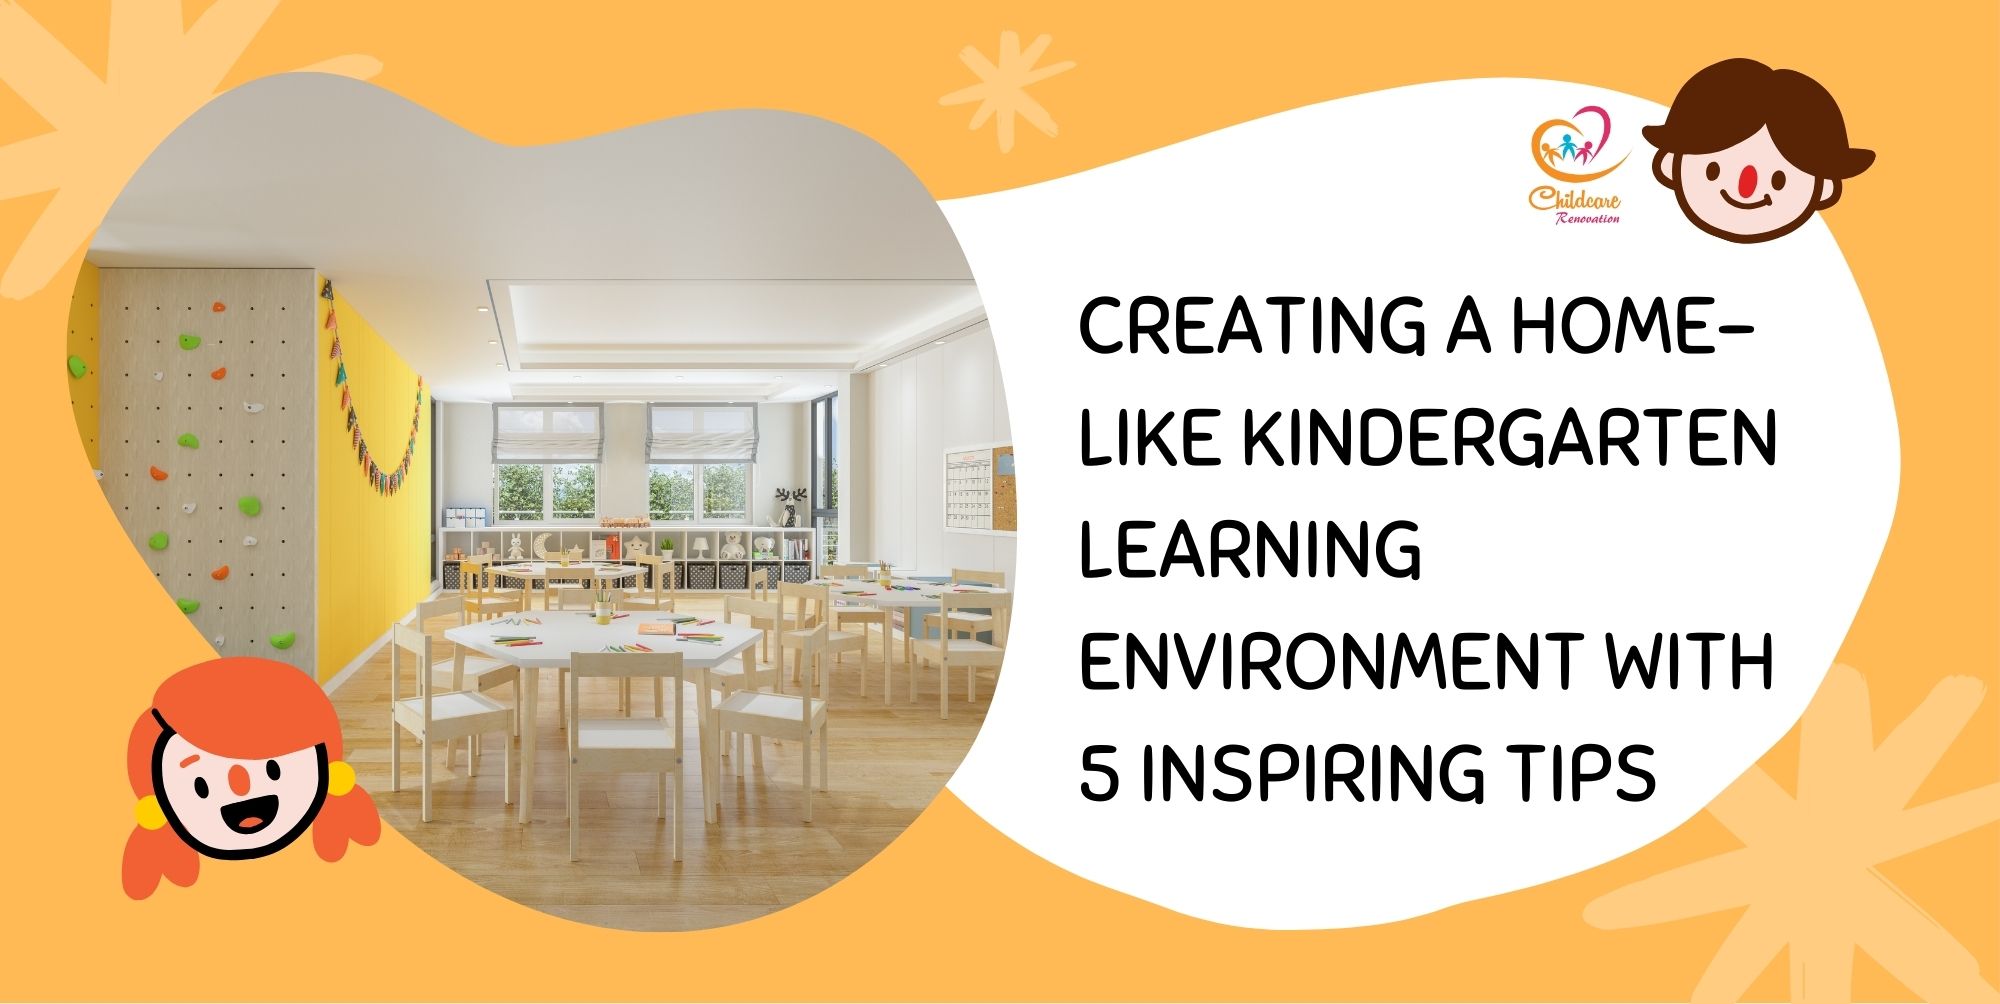 Creating a Home-Like Kindergarten Learning Environment With 5 Inspiring Tips